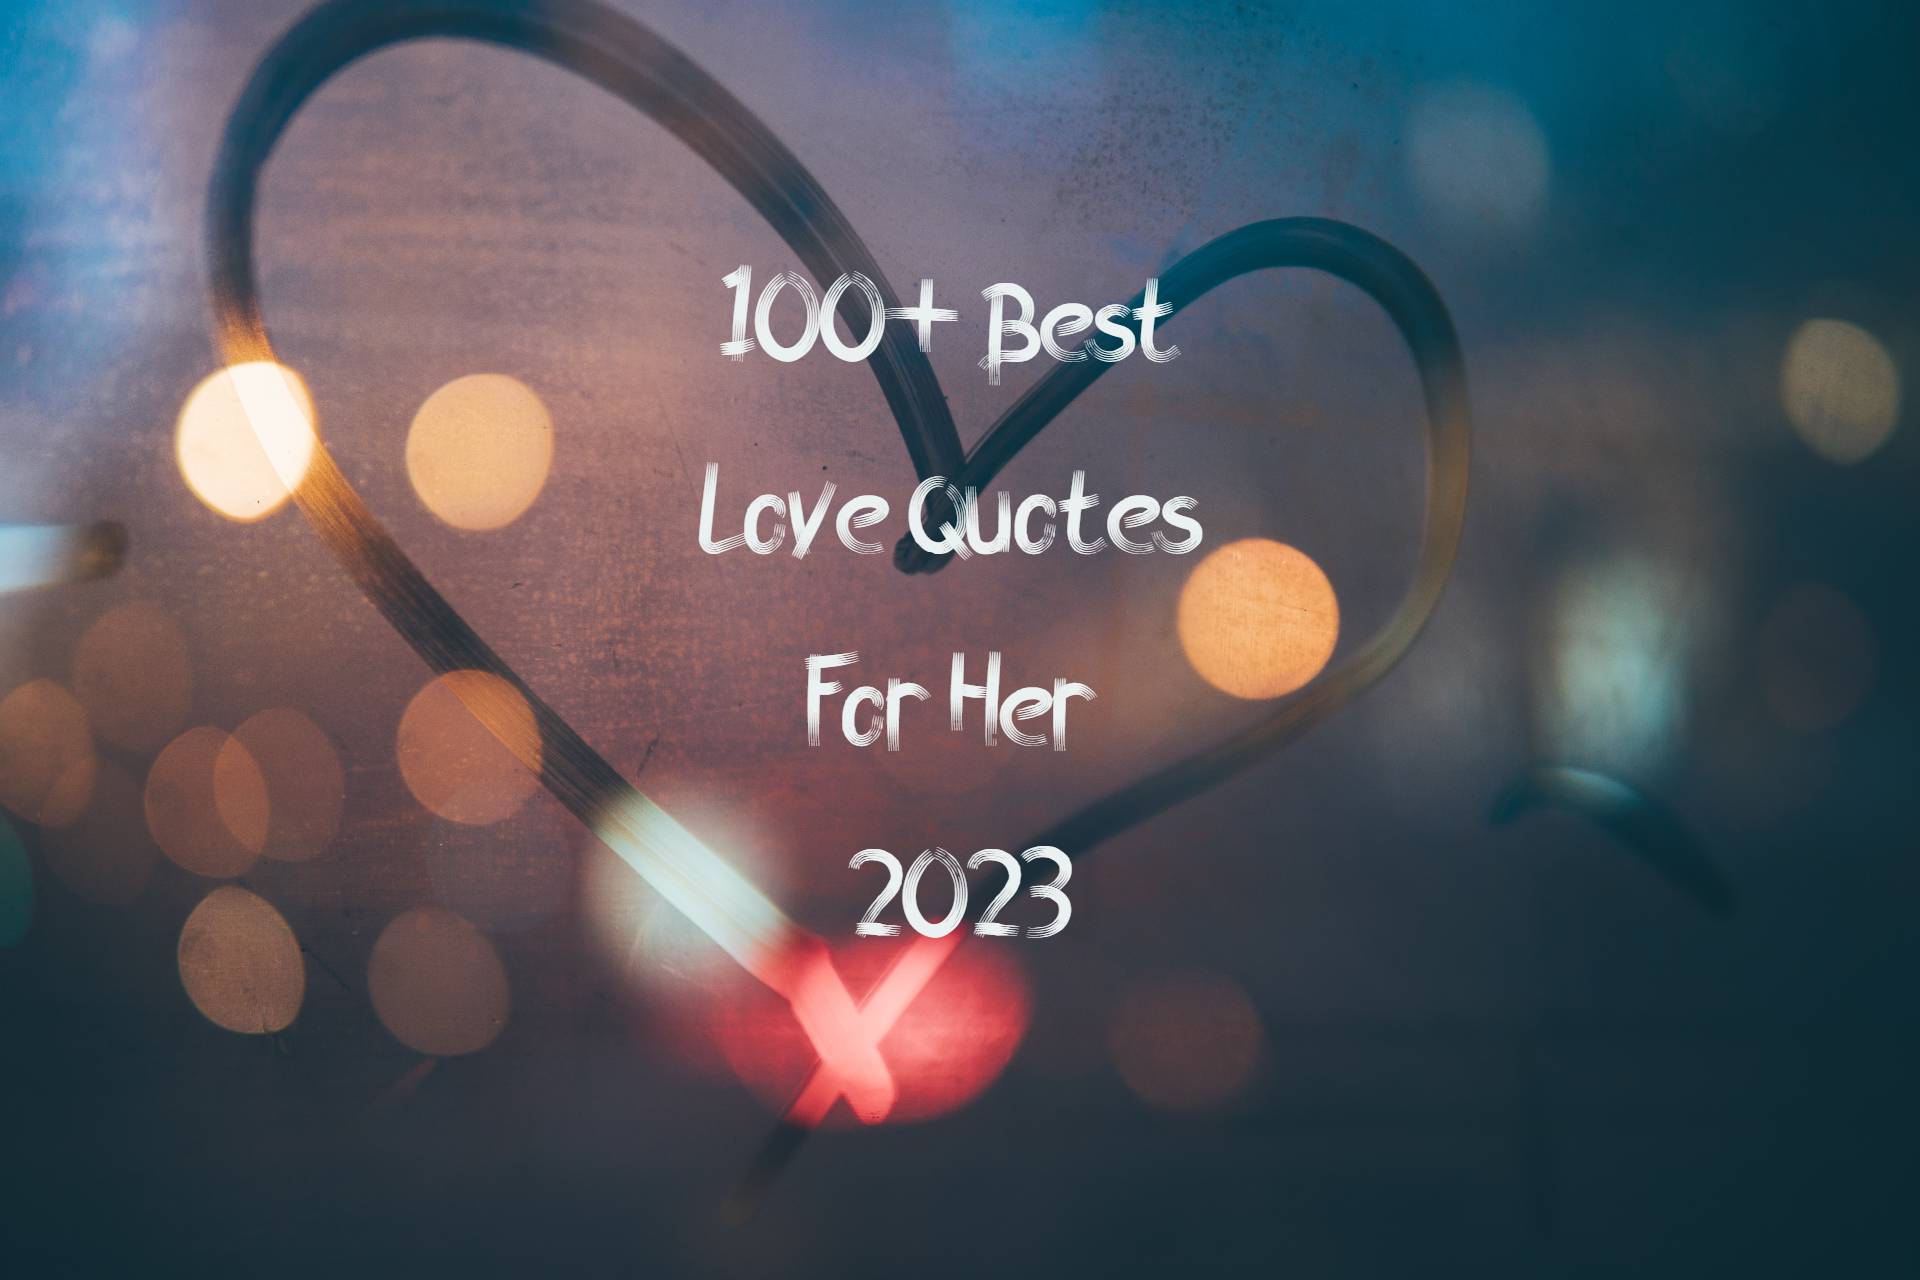 100+ Best Love Quotes For Her 2023